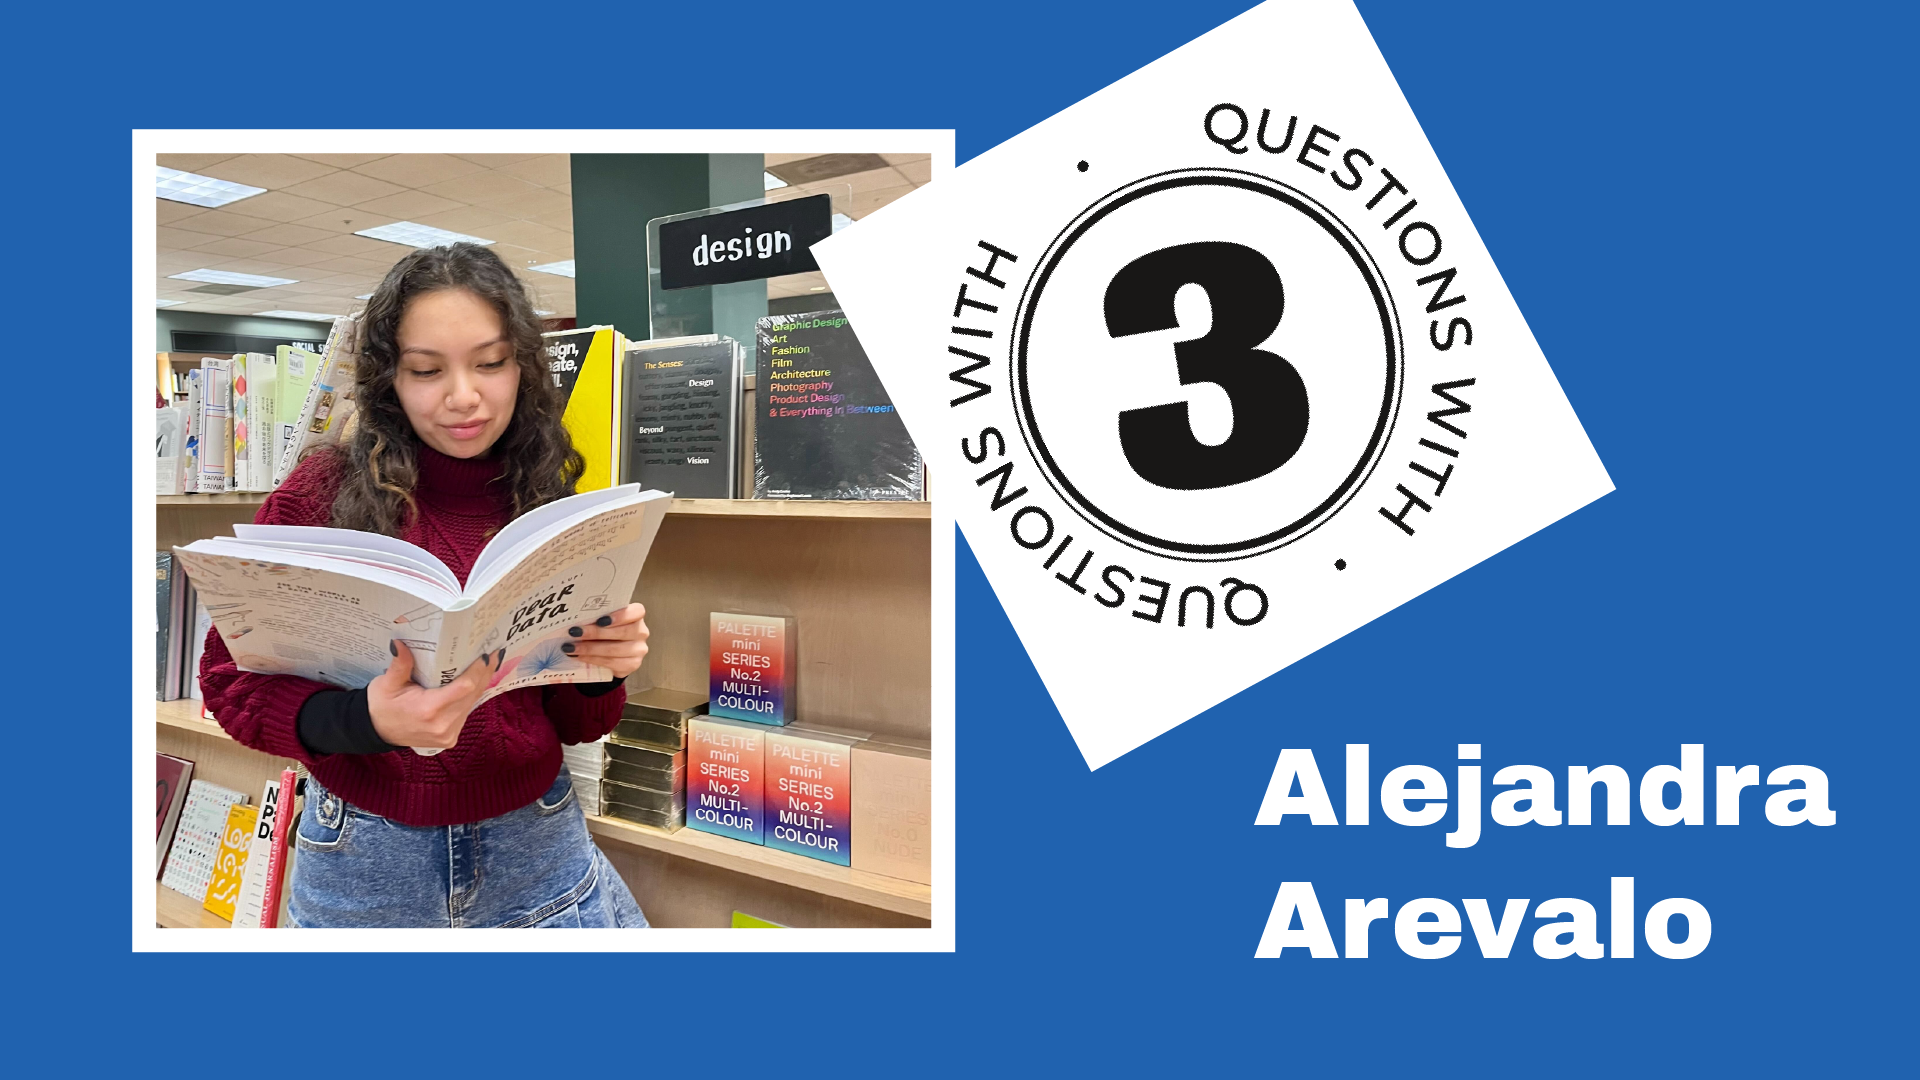 Cover image showing photo of Alejandra Arevalo with text saying "Three Questions With..."